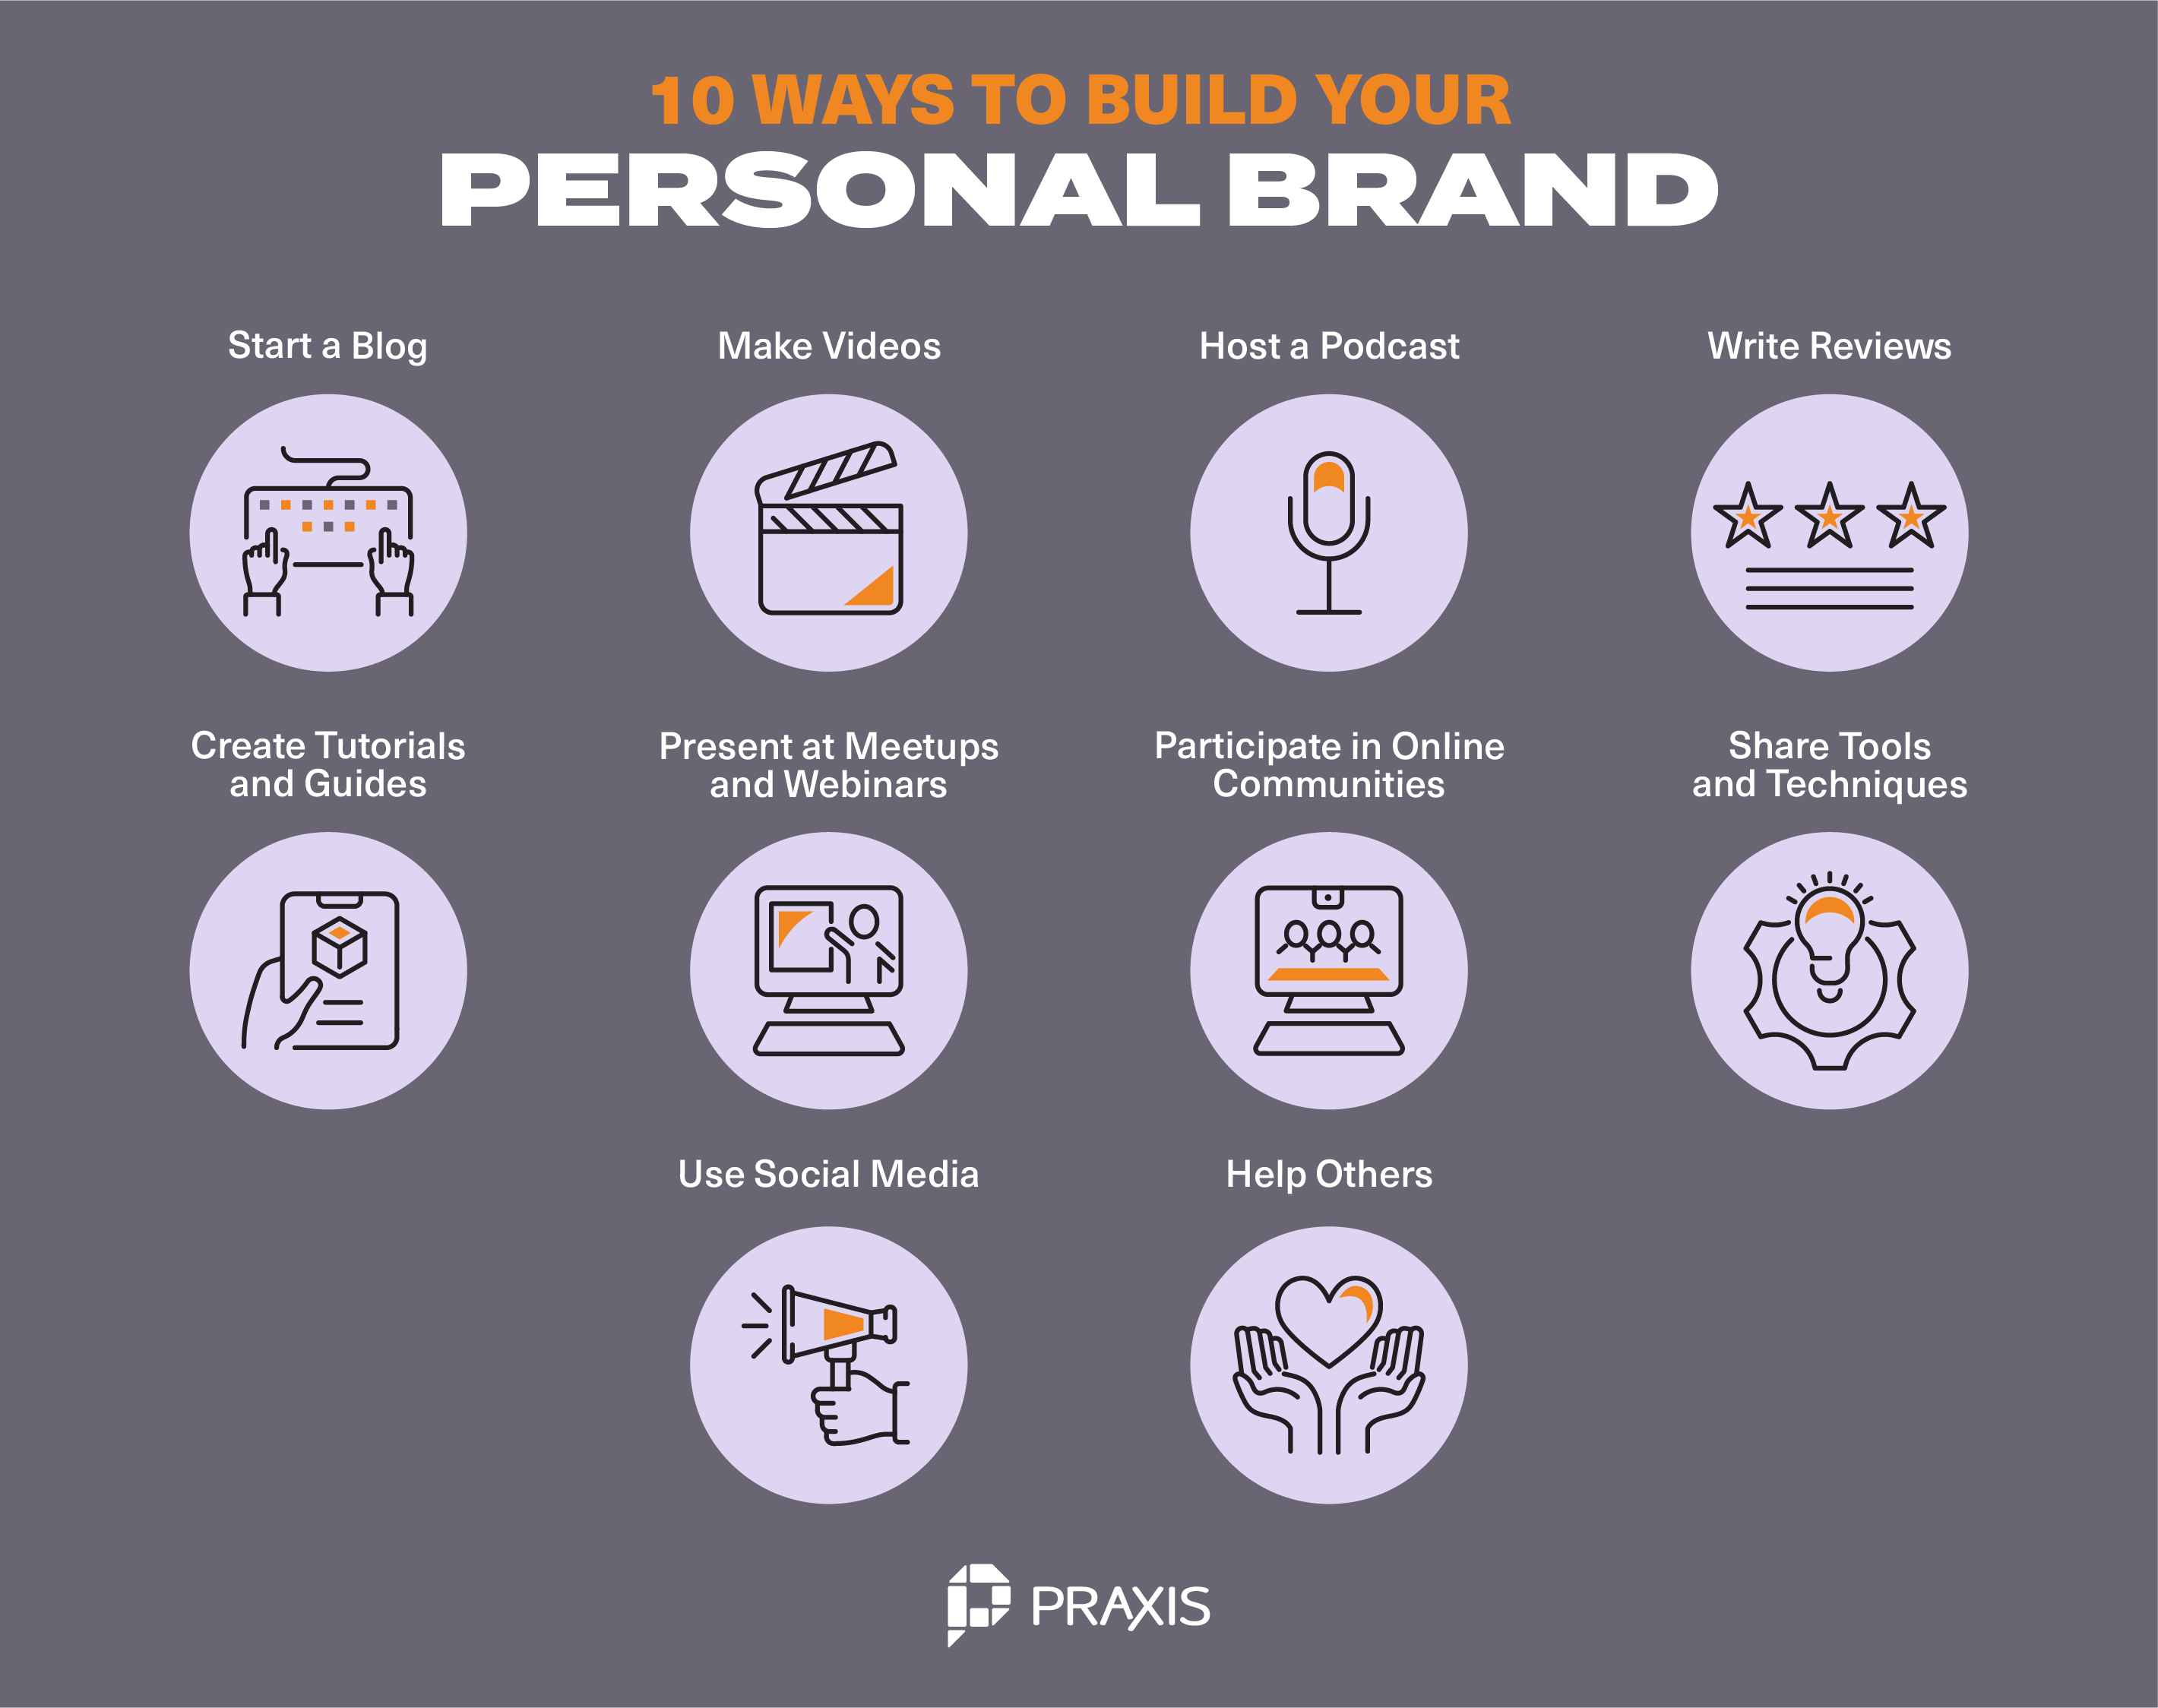 On poster 10 ways with key points mentioned with essential to build a personal brand